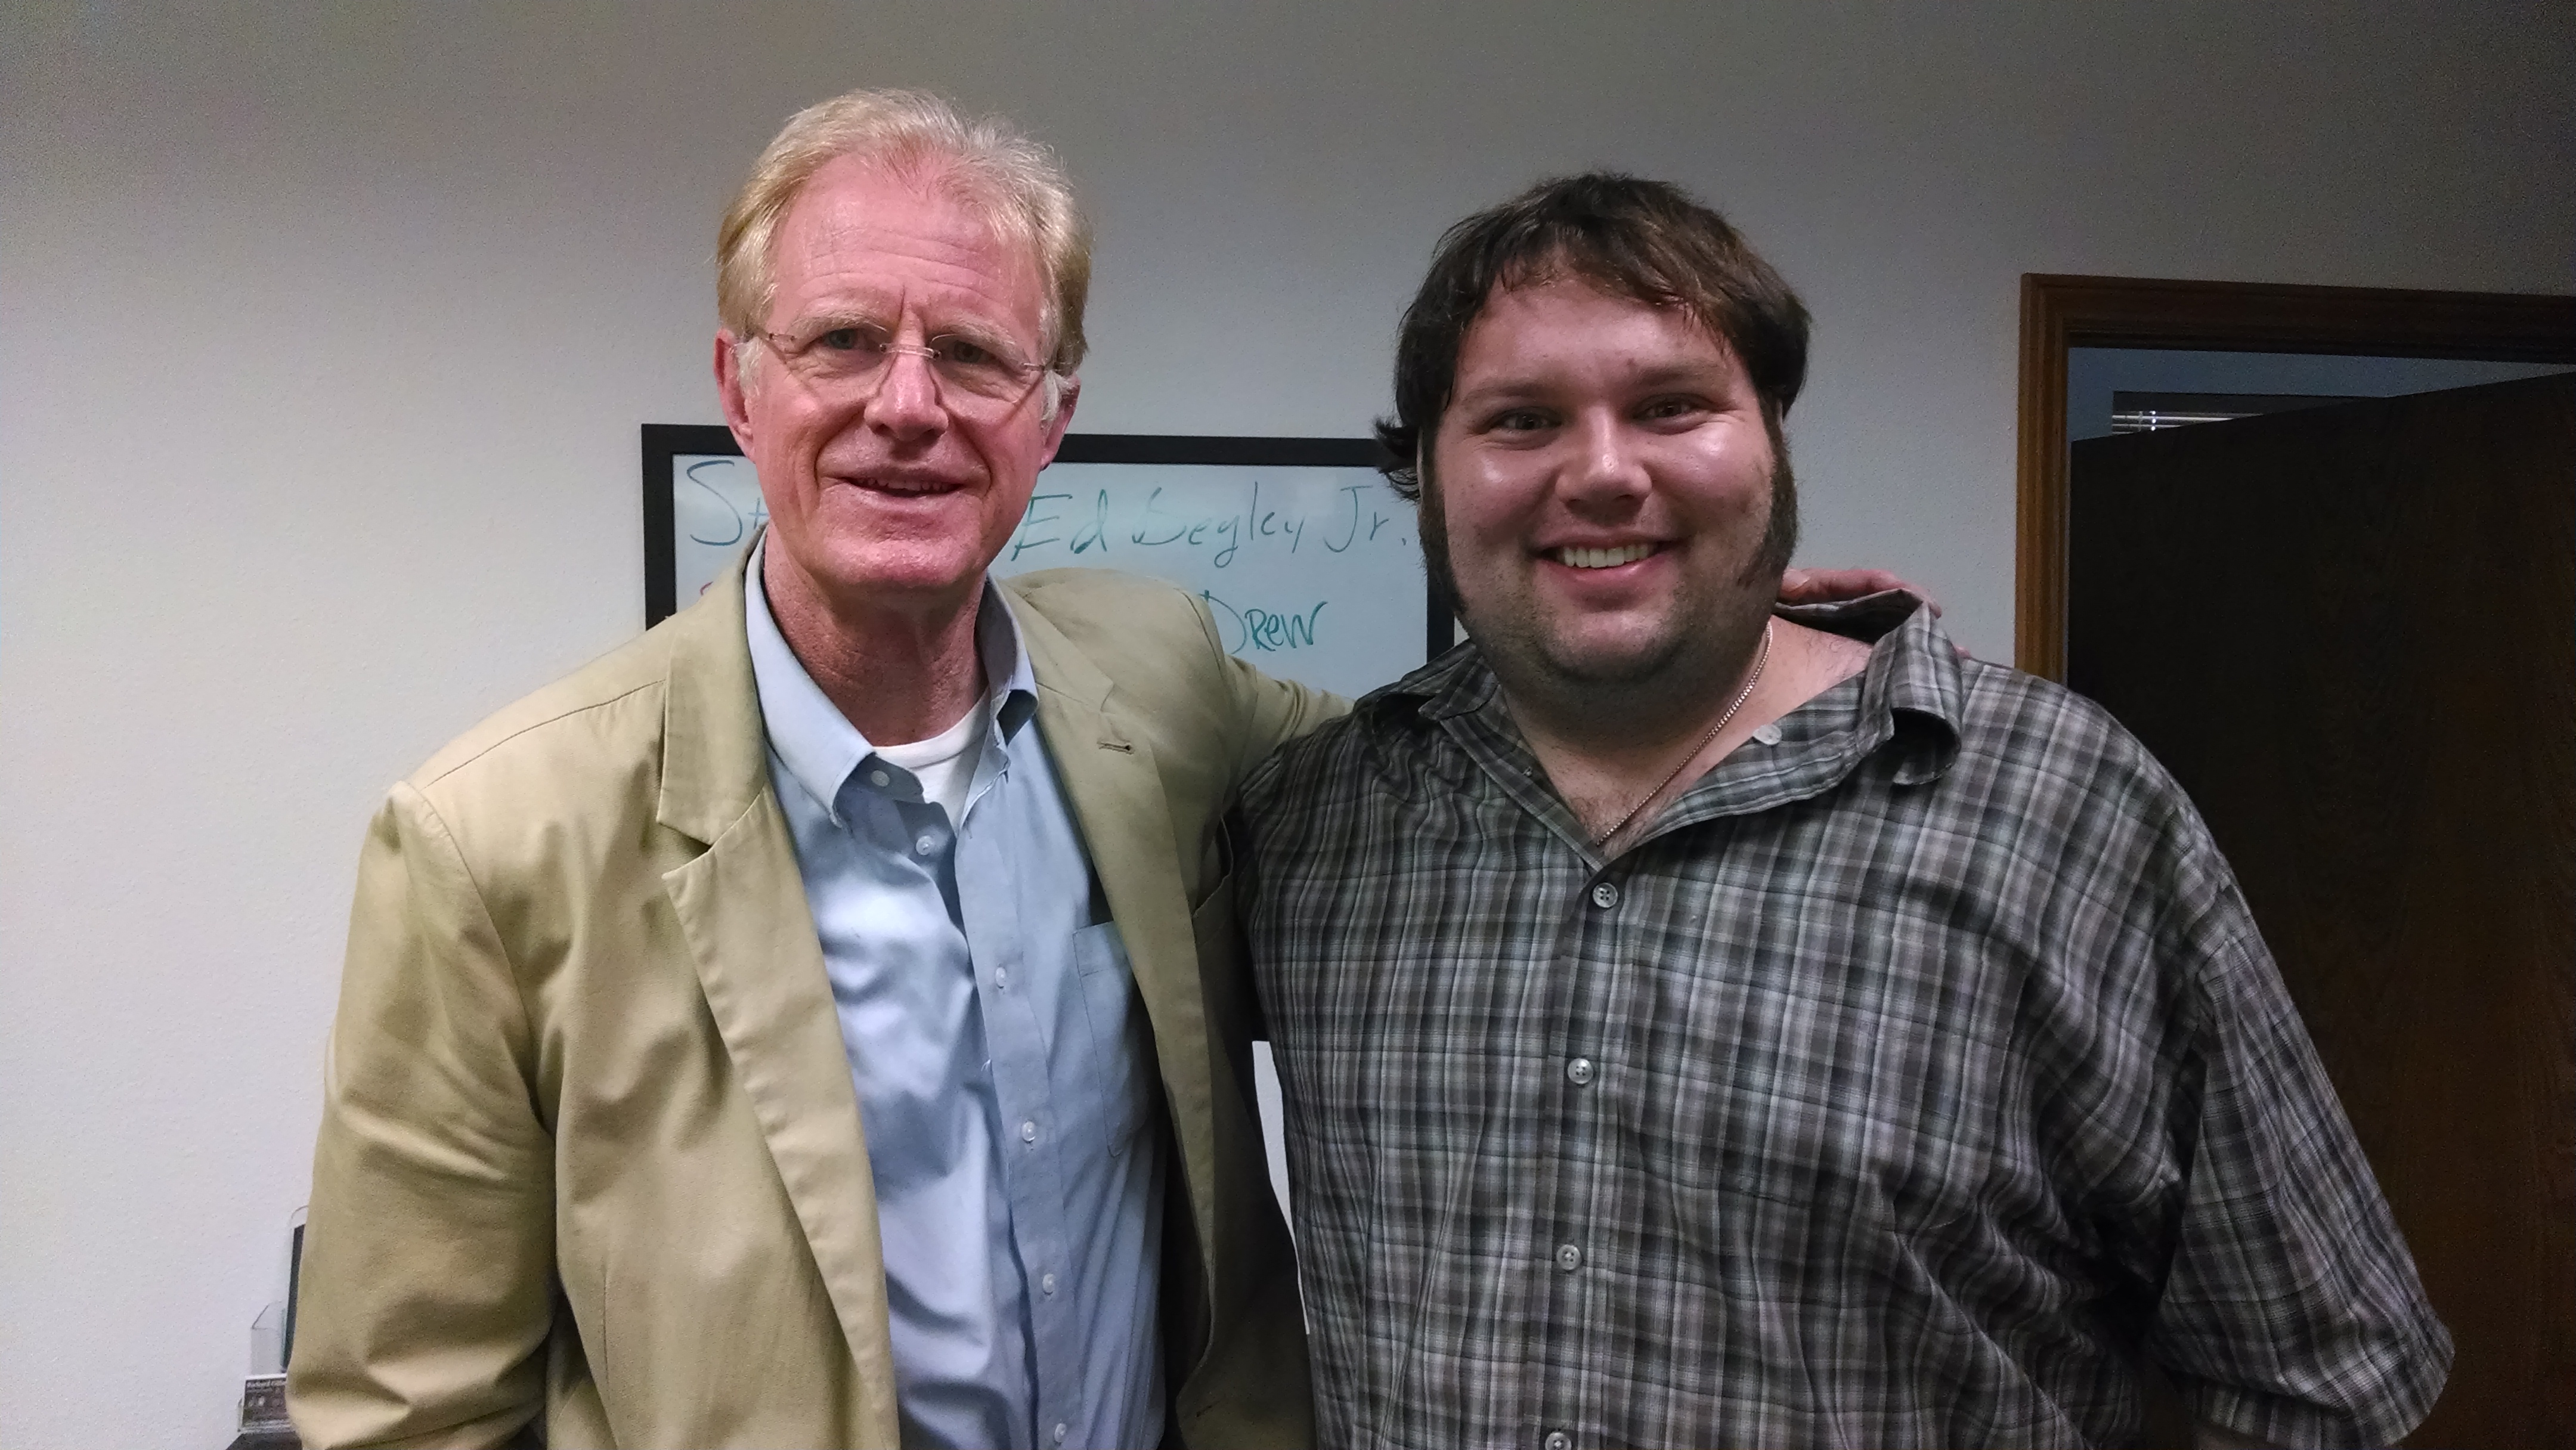 Acting Workshop with the Legend Ed Begley Jr.